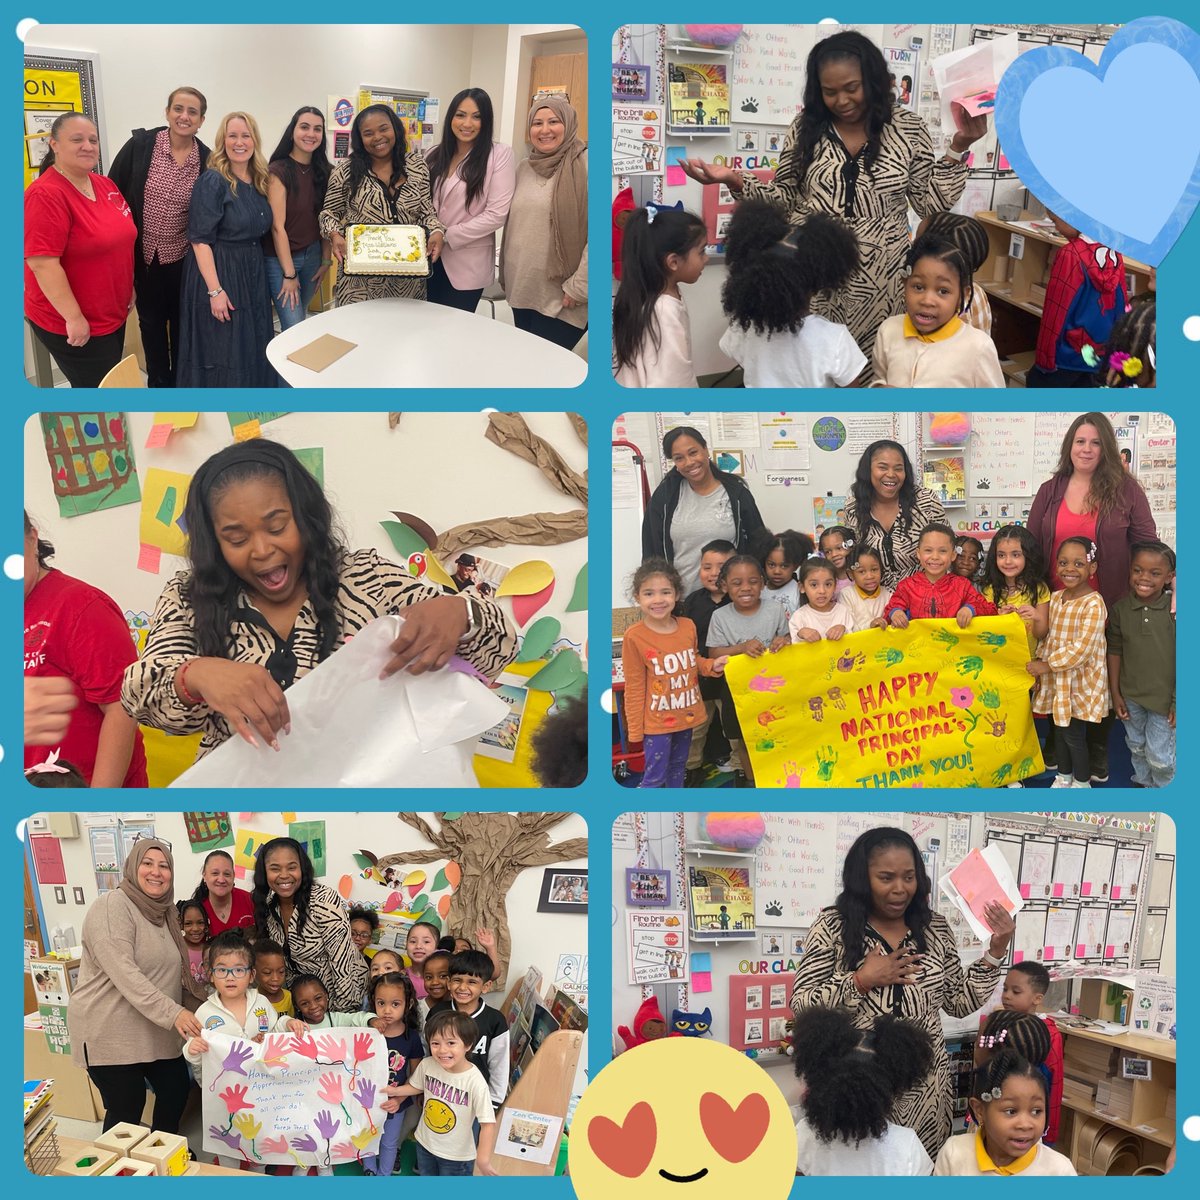 A good leader encourages & promotes others to lead as well. Thank you @EdeleWilliams for empowering families, students & staff to utilize their talents to shine. Happy Principal’s Appreciation. @Natalie_Iacono @DrMarionWilson @CSD31SI @CChavezD31 @D31DSPalton @FollowCSA